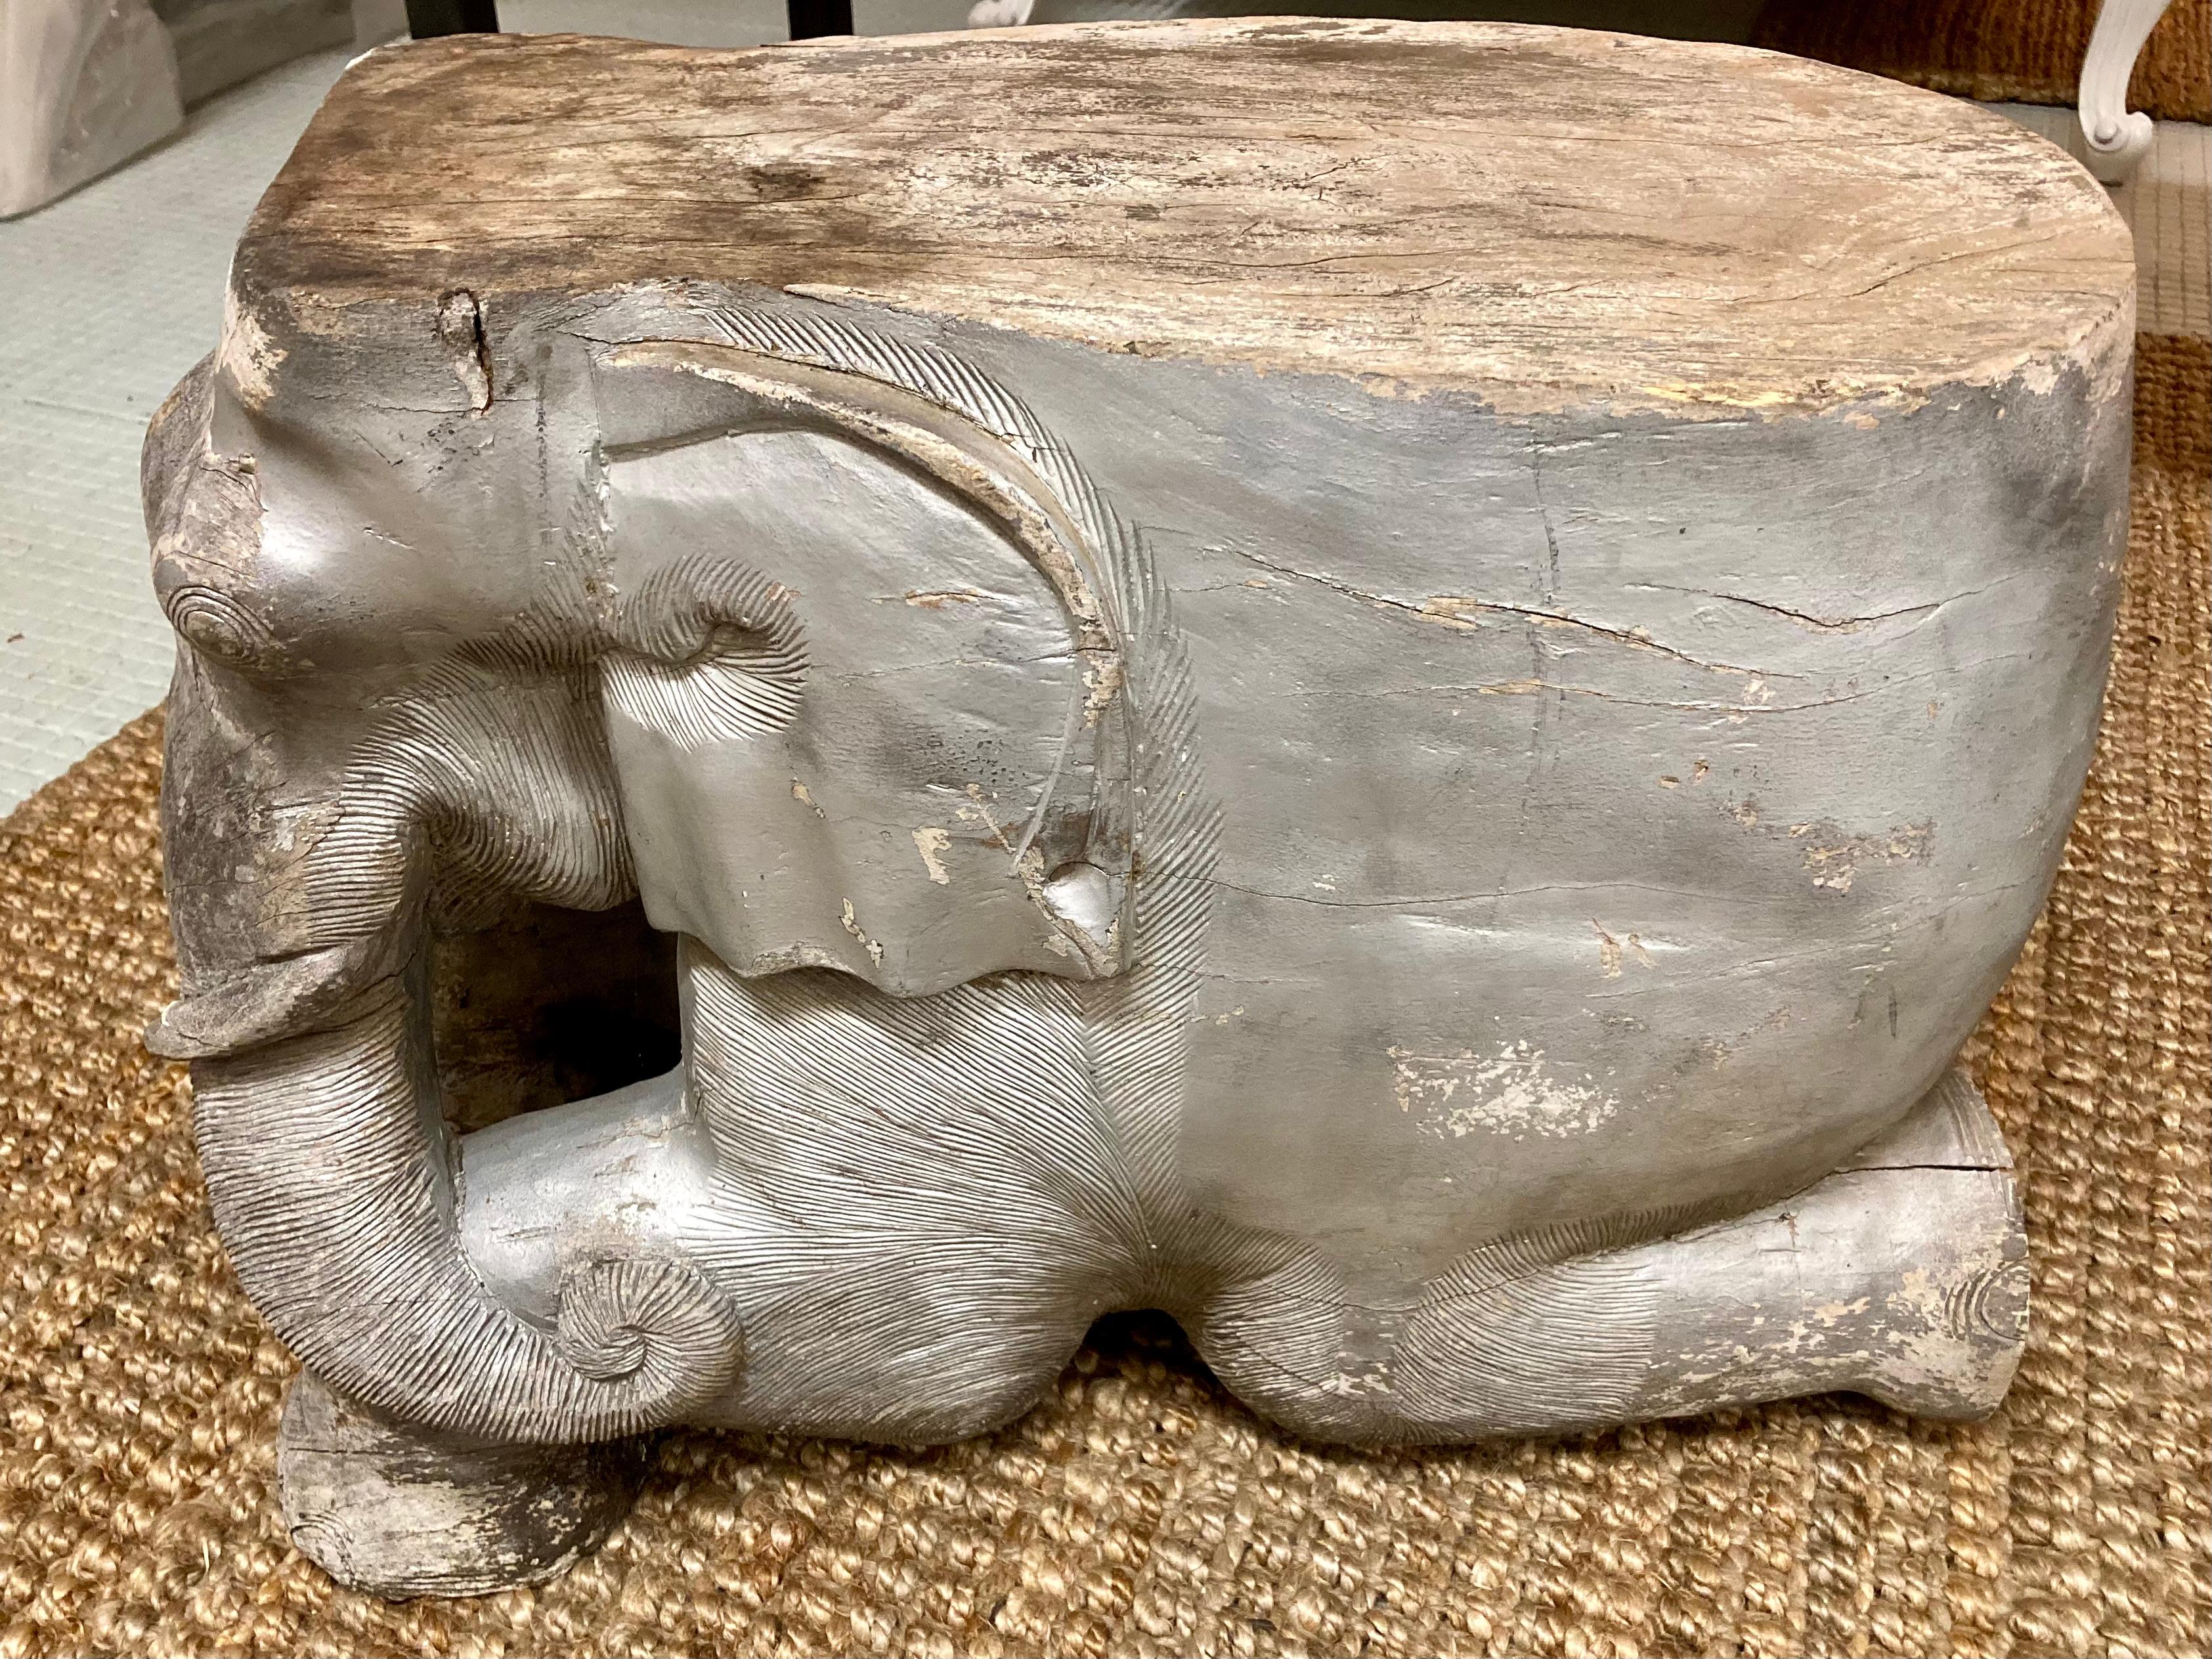 Beautiful carved wood elephant cocktail table/seat. This elephant shows trunk swinging to the right side, and we have two available in stock. Additionally, we have another pair with trunk swinging to the left so collect them all! They have an aged